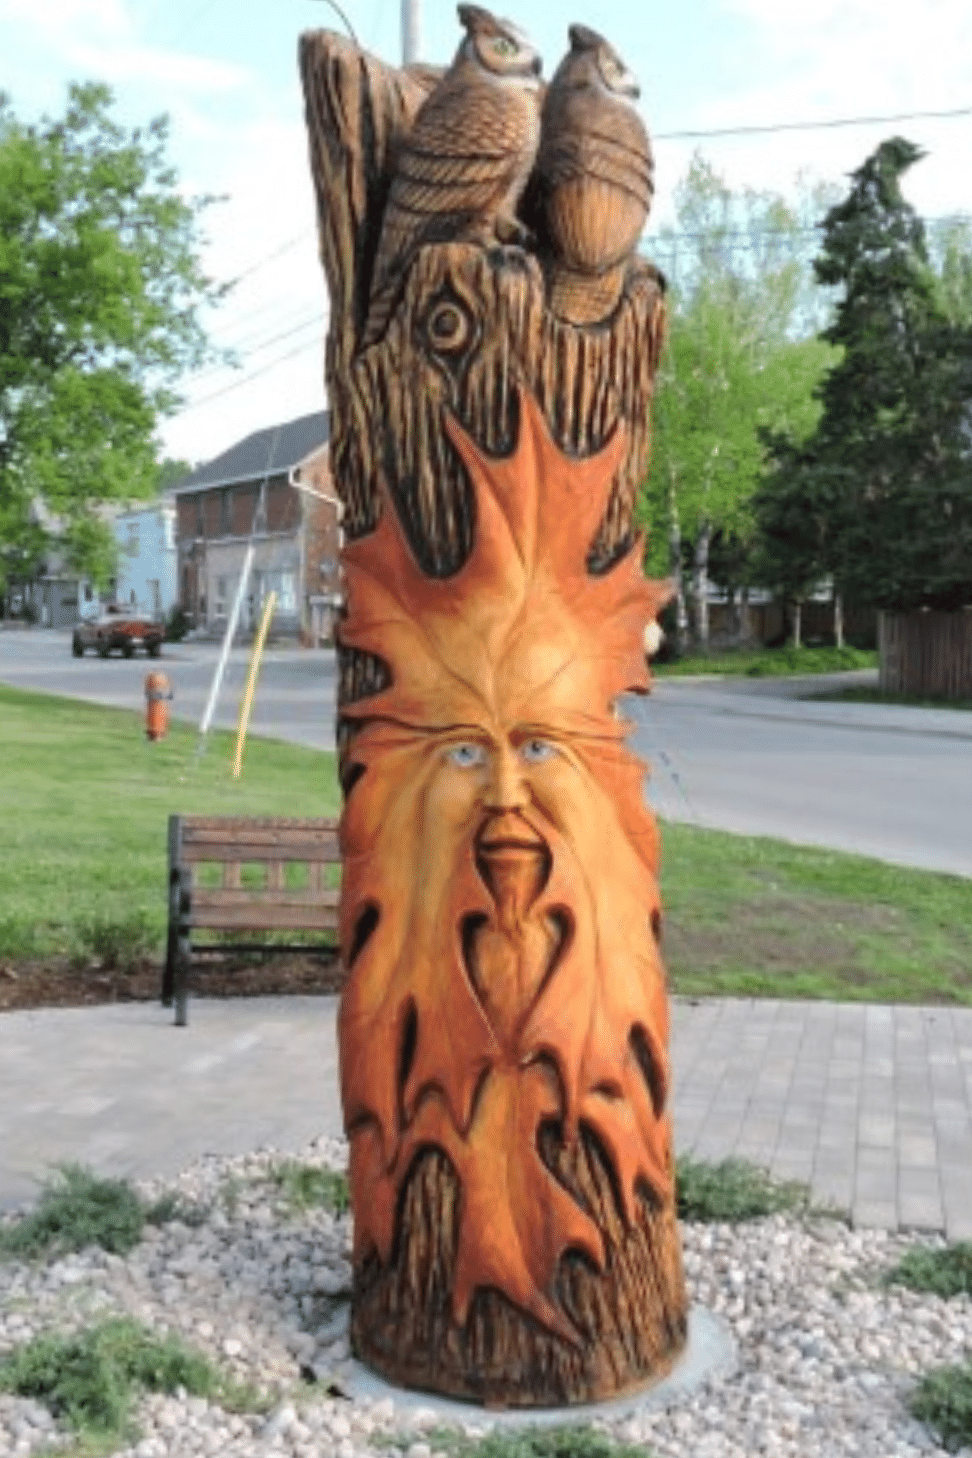 Tree sculpture with a large leaf with a face inside of it carved into the side of the trunk